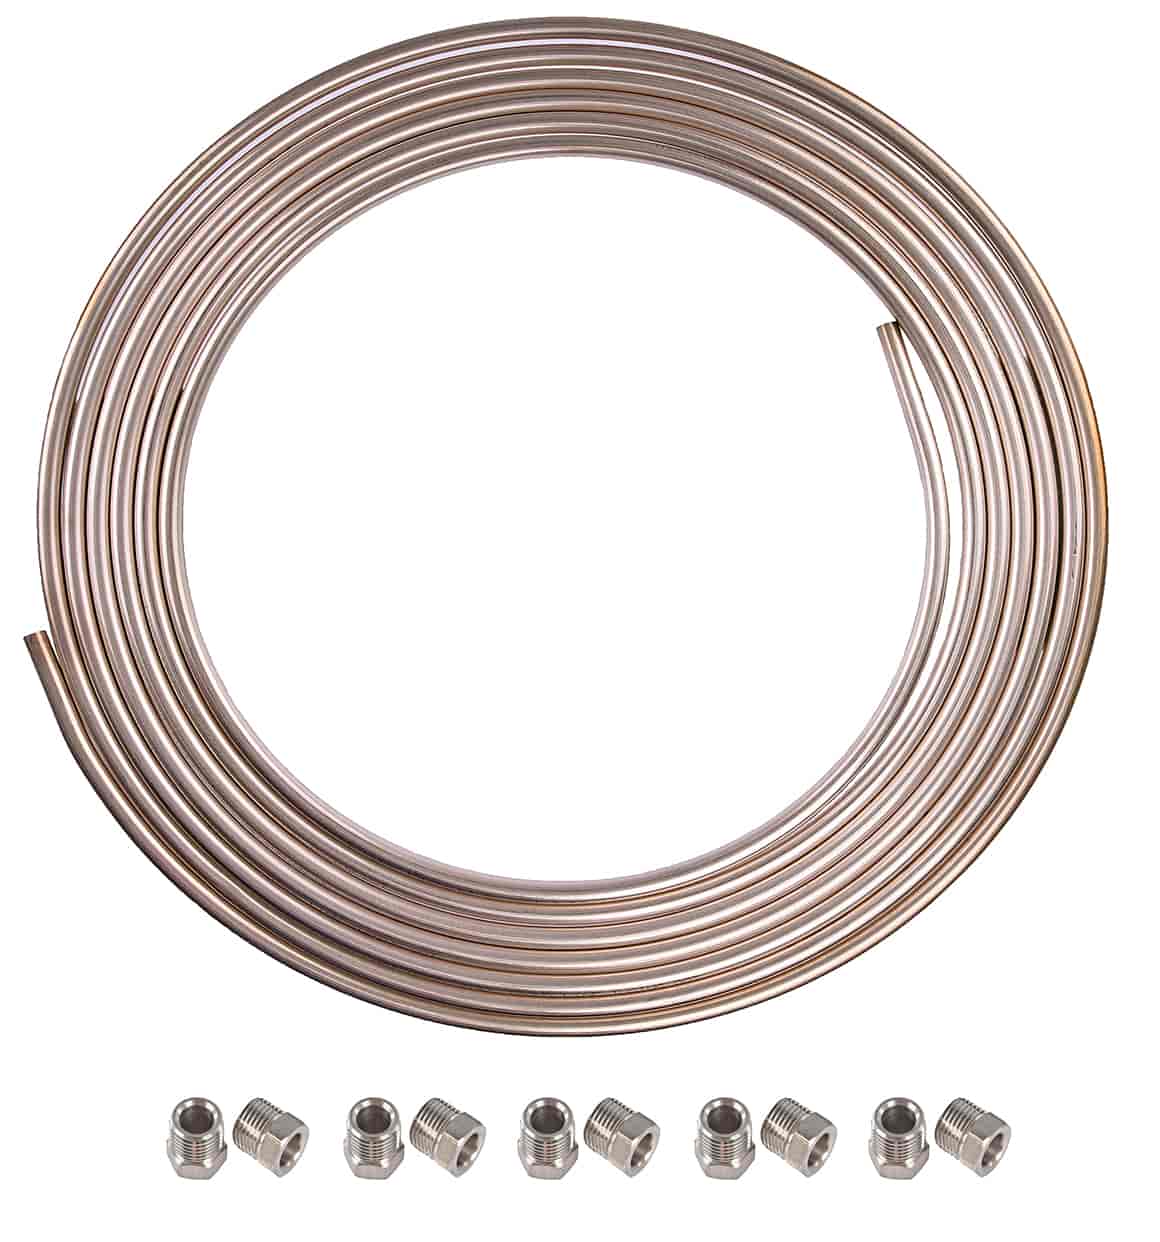 JEGS 635806K: NiCopp Tubing & Nut Kit | 3/8 in. x 25 ft. of Tubing | 5/8  in.-18 x 3/8 in. I.D. Stainless Steel Tube Nuts - JEGS